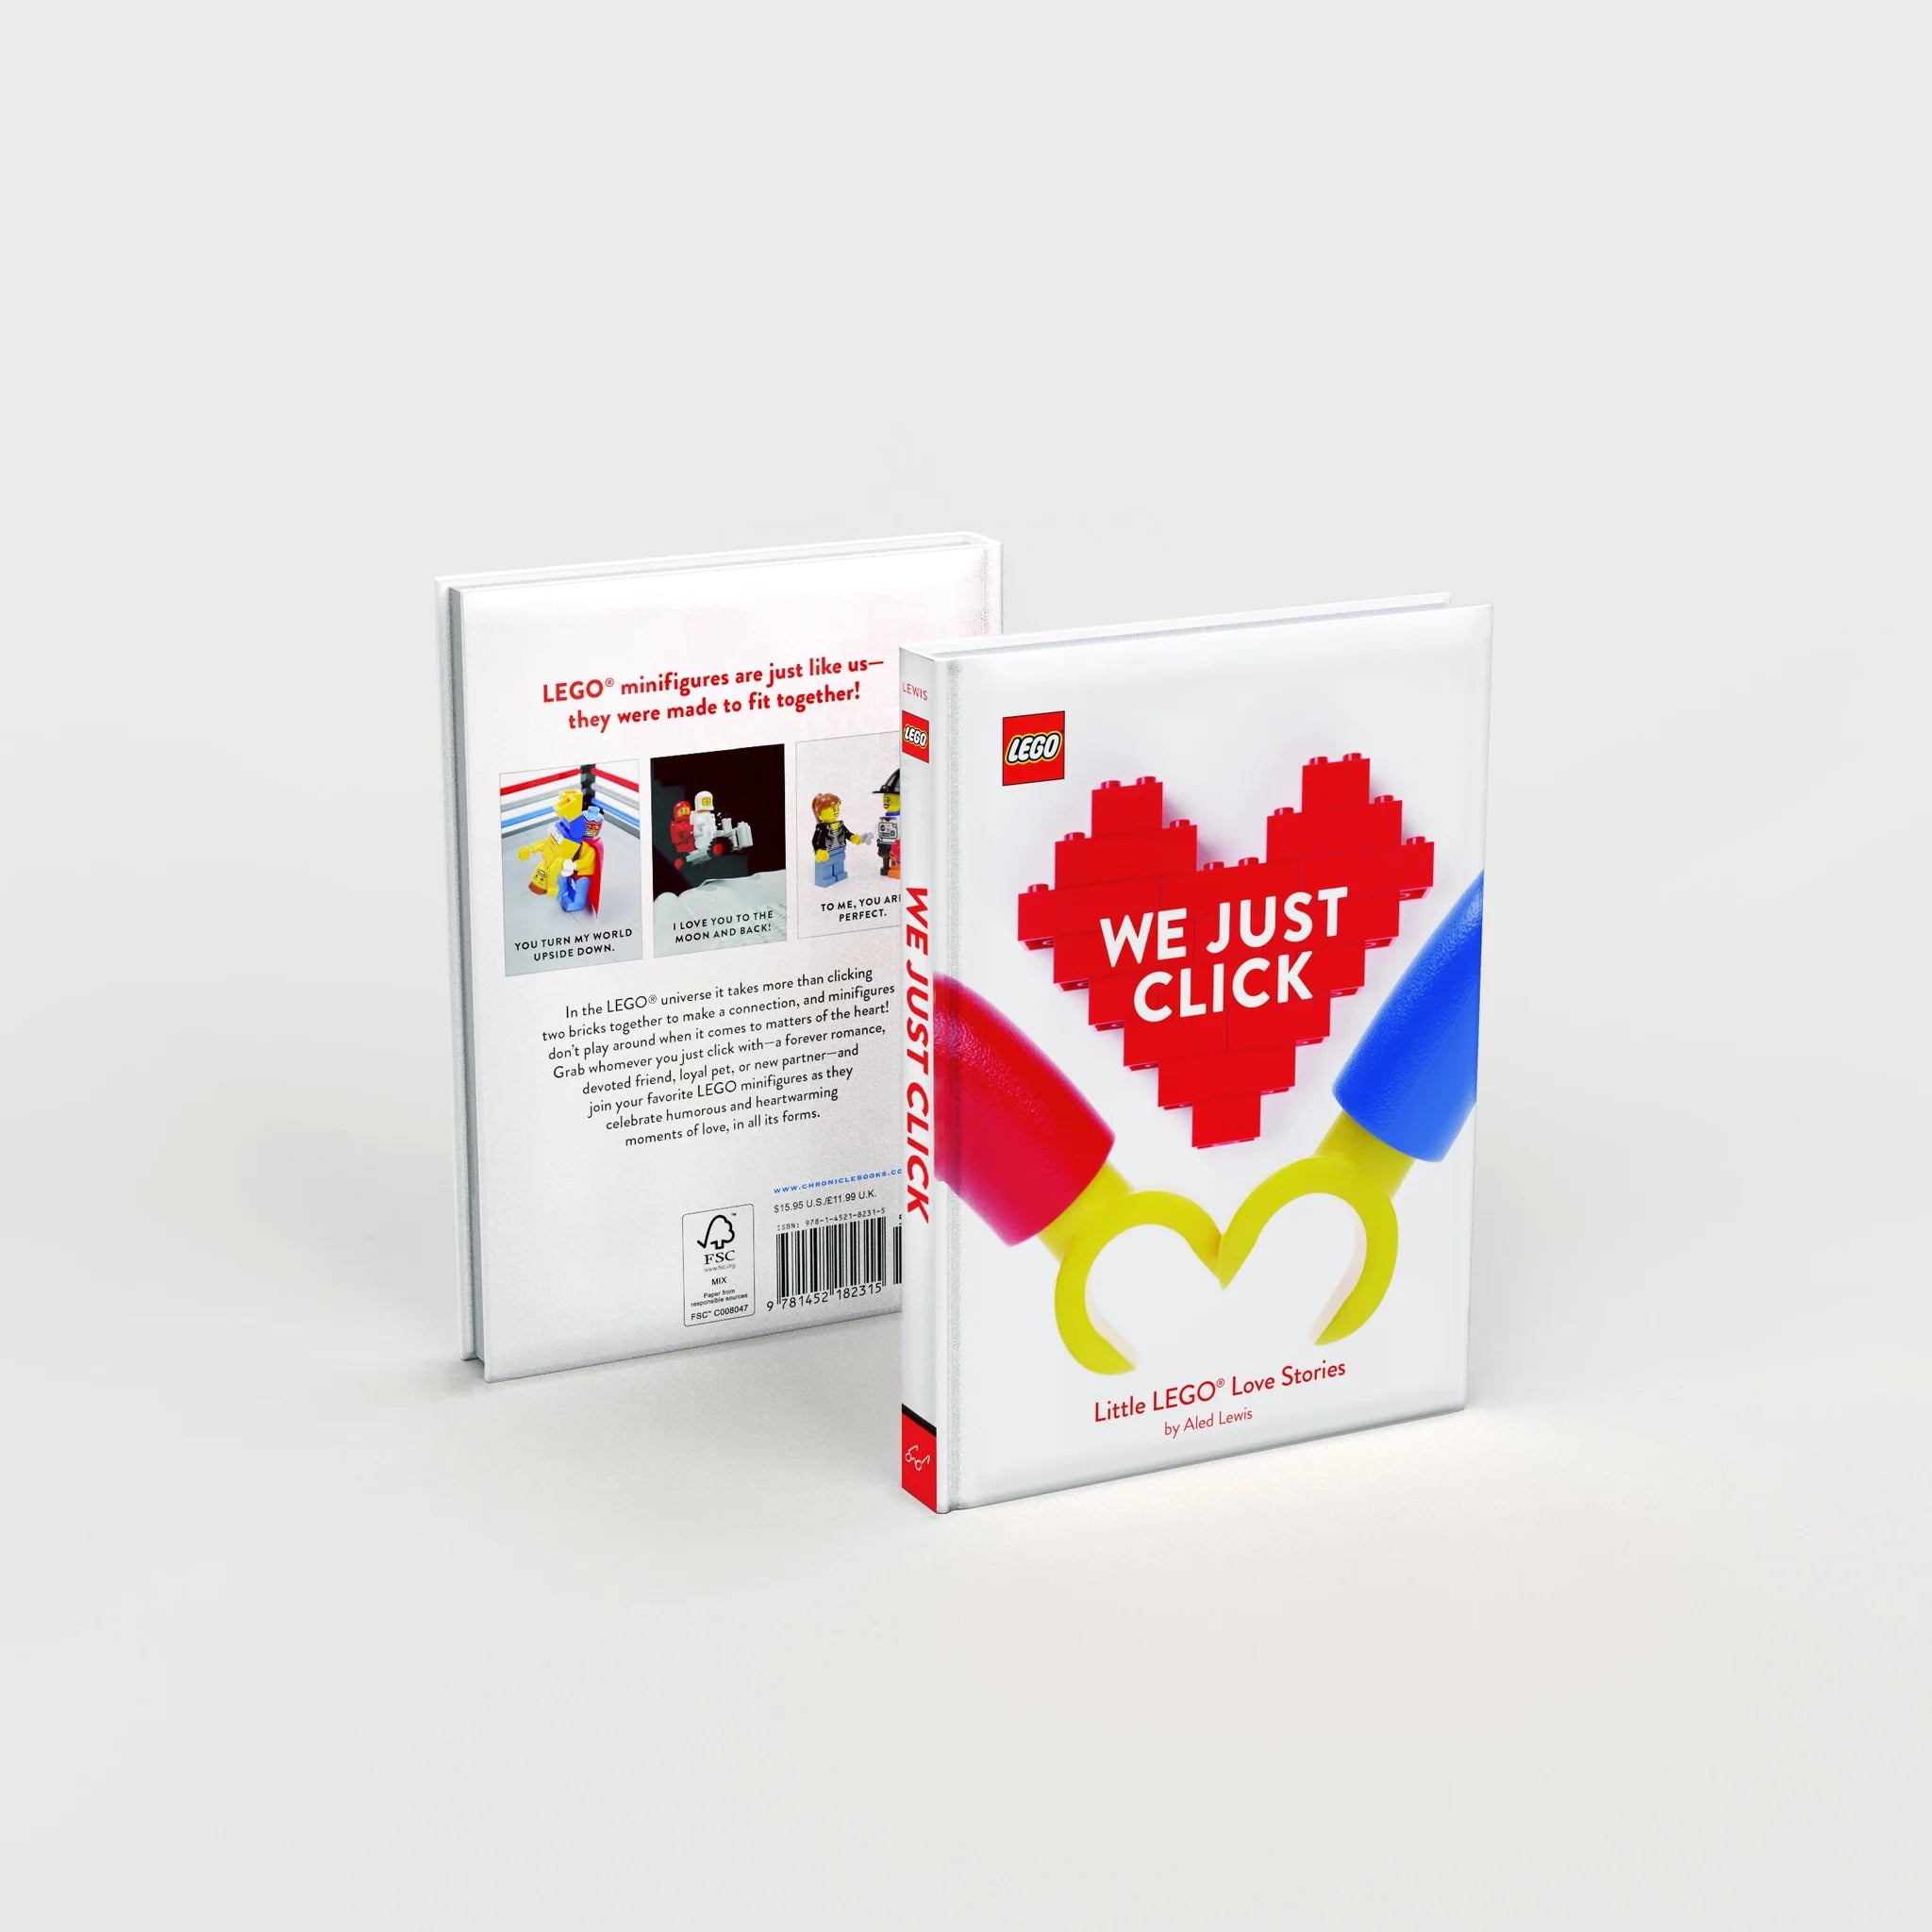 We Just Click, Little LEGO® Love Stories book by Aled Lewis